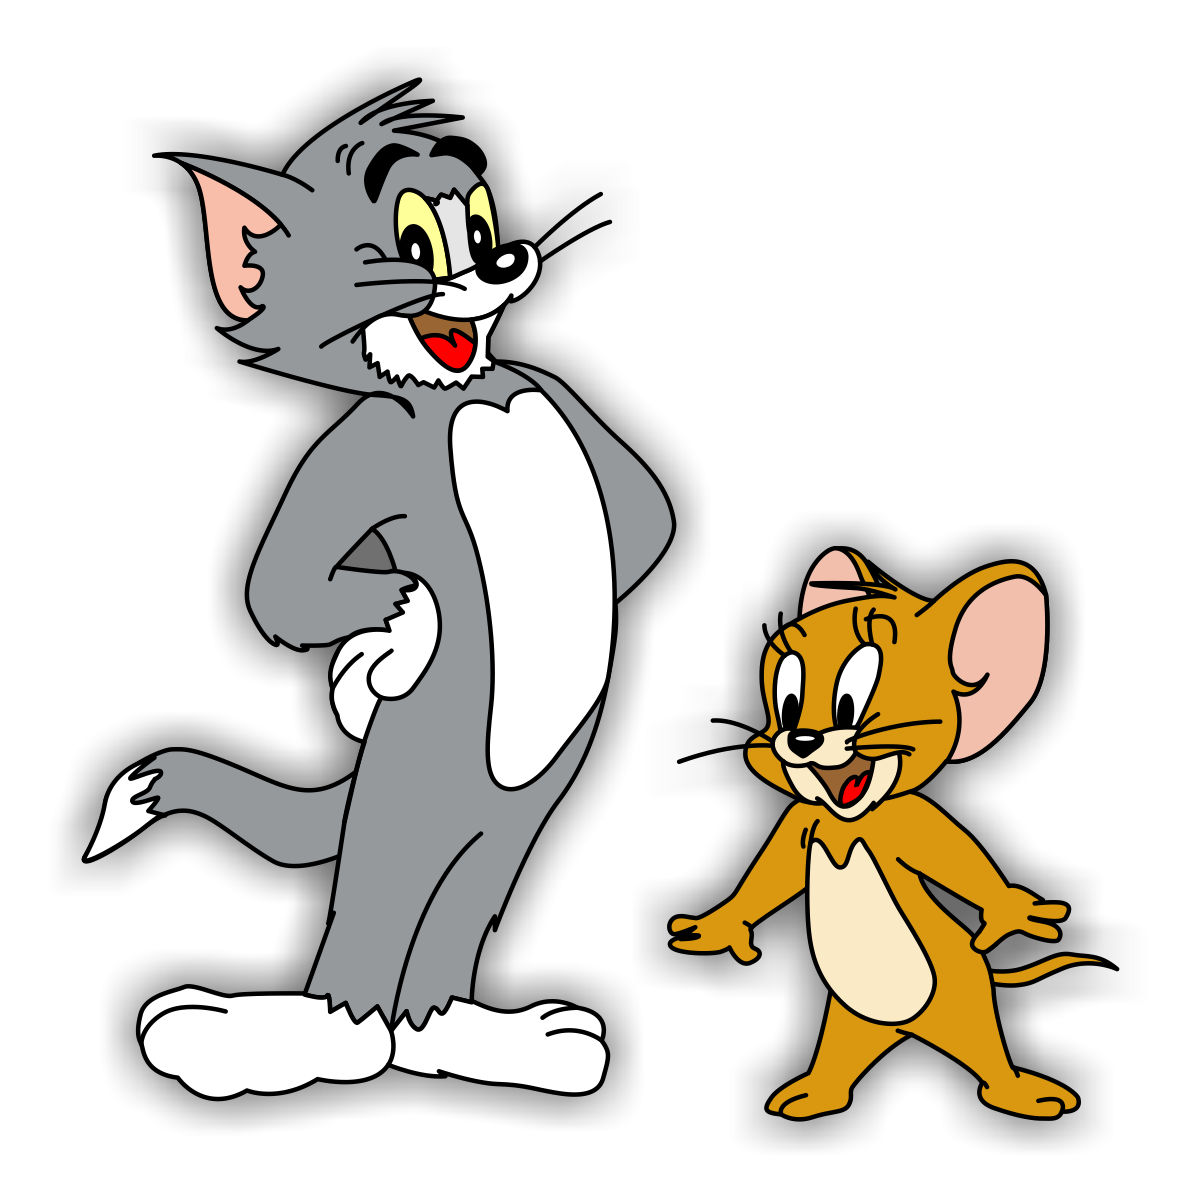 Tom and jerry images